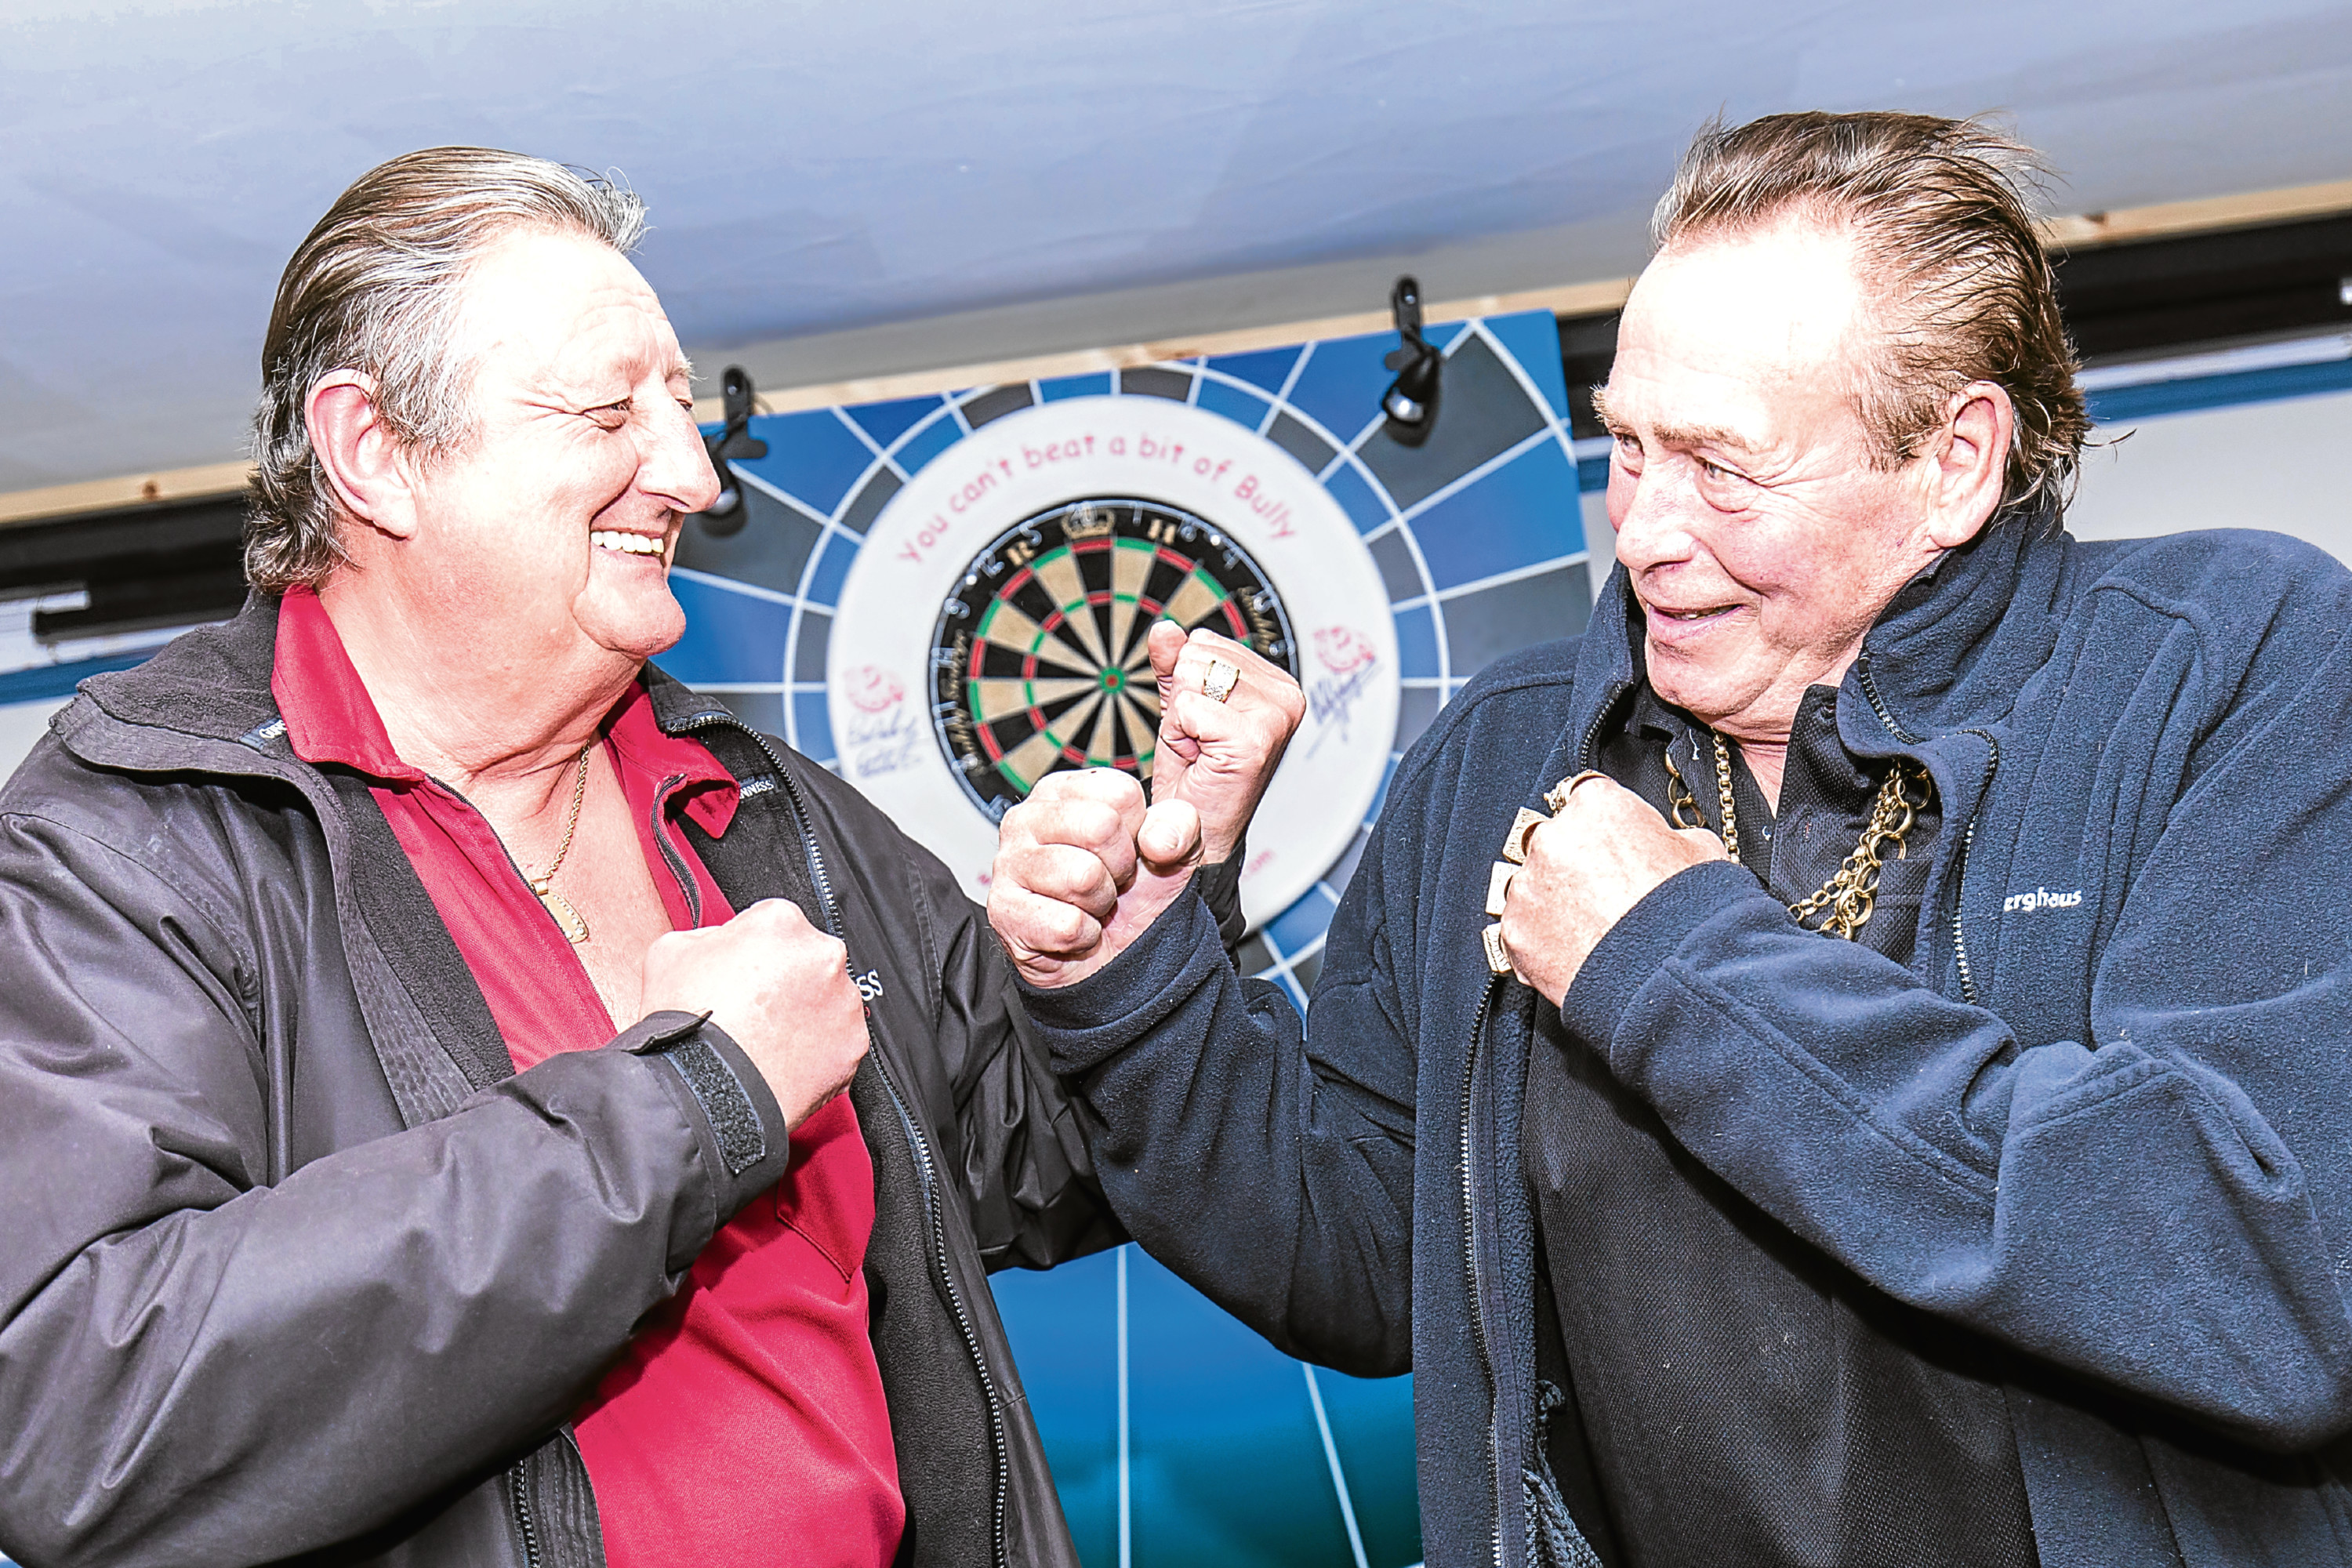 Bobby George and Eric Bristow on their tour of the western isles, in Stornoway. (Colin Cameron)